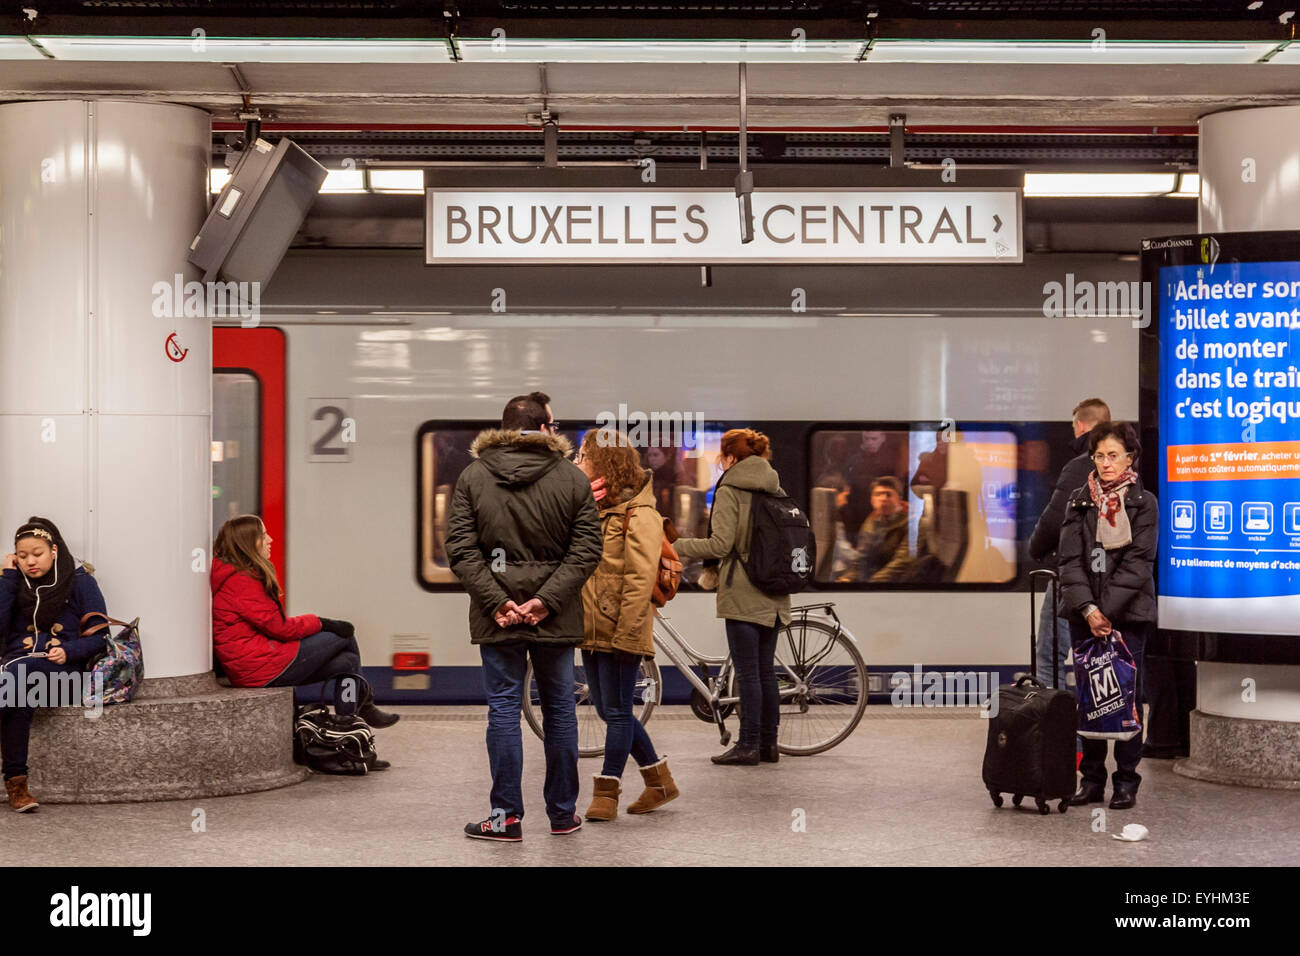 Brussels railway central station Stock Photo